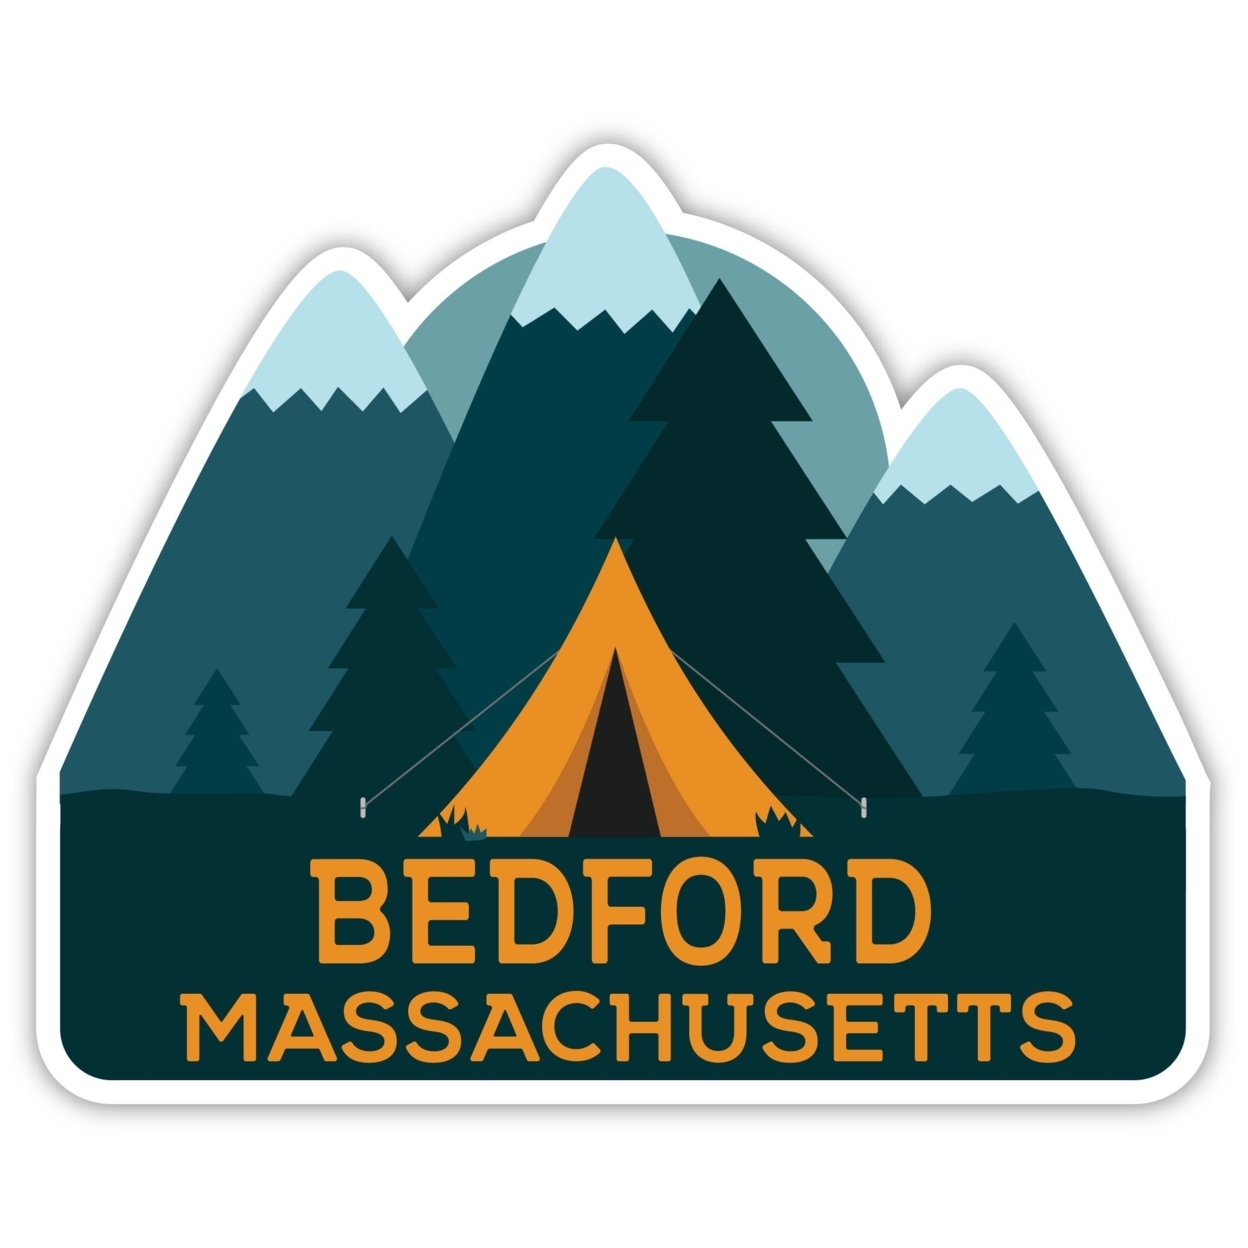 Bedford Massachusetts Souvenir Decorative Stickers (Choose Theme And Size) - 4-Pack, 12-Inch, Tent